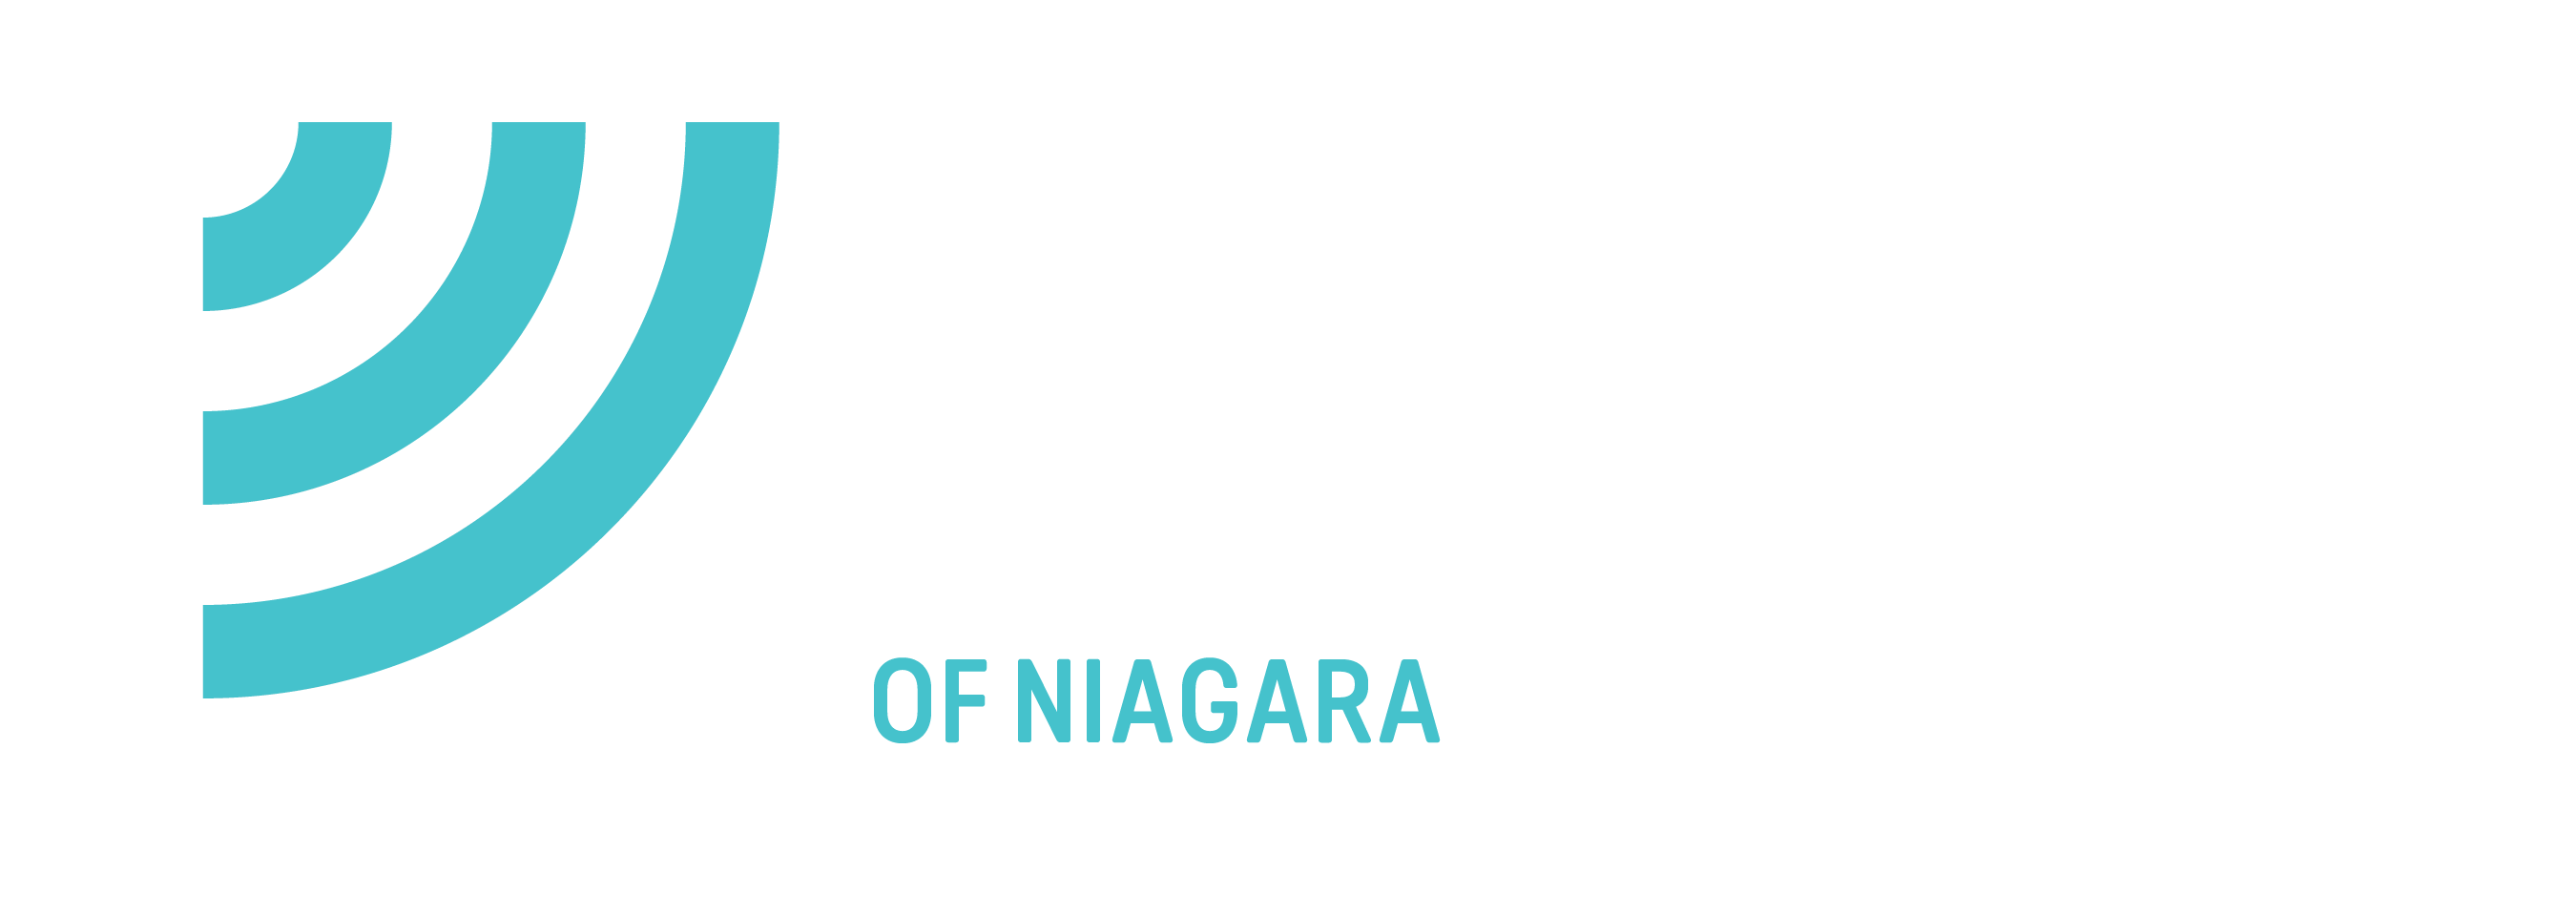 JOIN BIG BROTHERS BIG SISTERS THIS SEPTEMBER IN CELEBRATING THE POWER OF MENTORSHIP - Big Brothers Big Sisters of Niagara